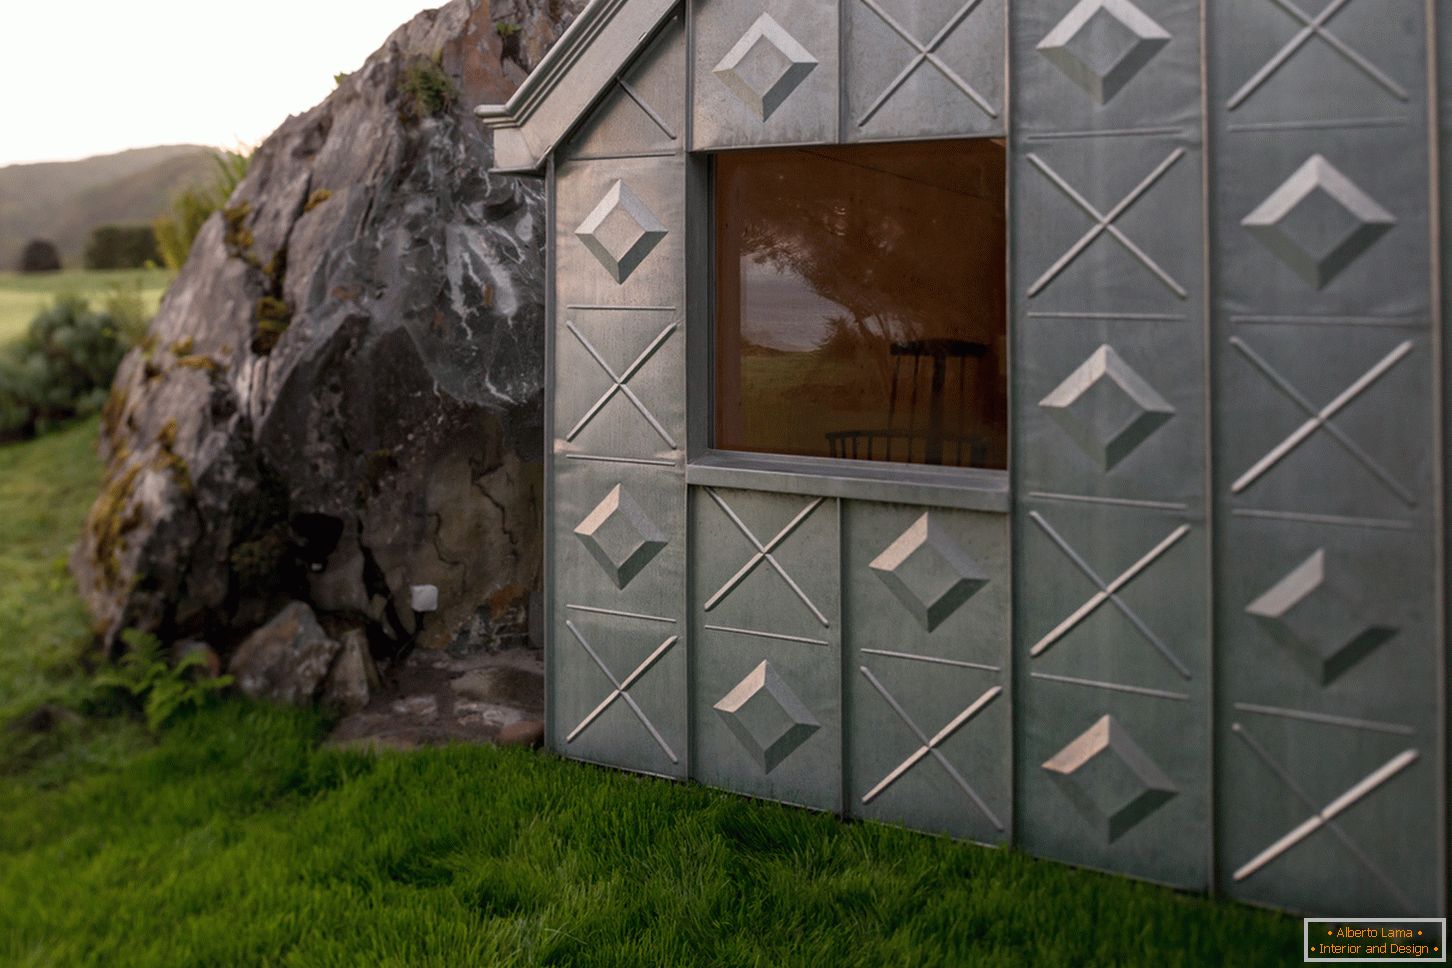 The facade of a small house from Midden Studio